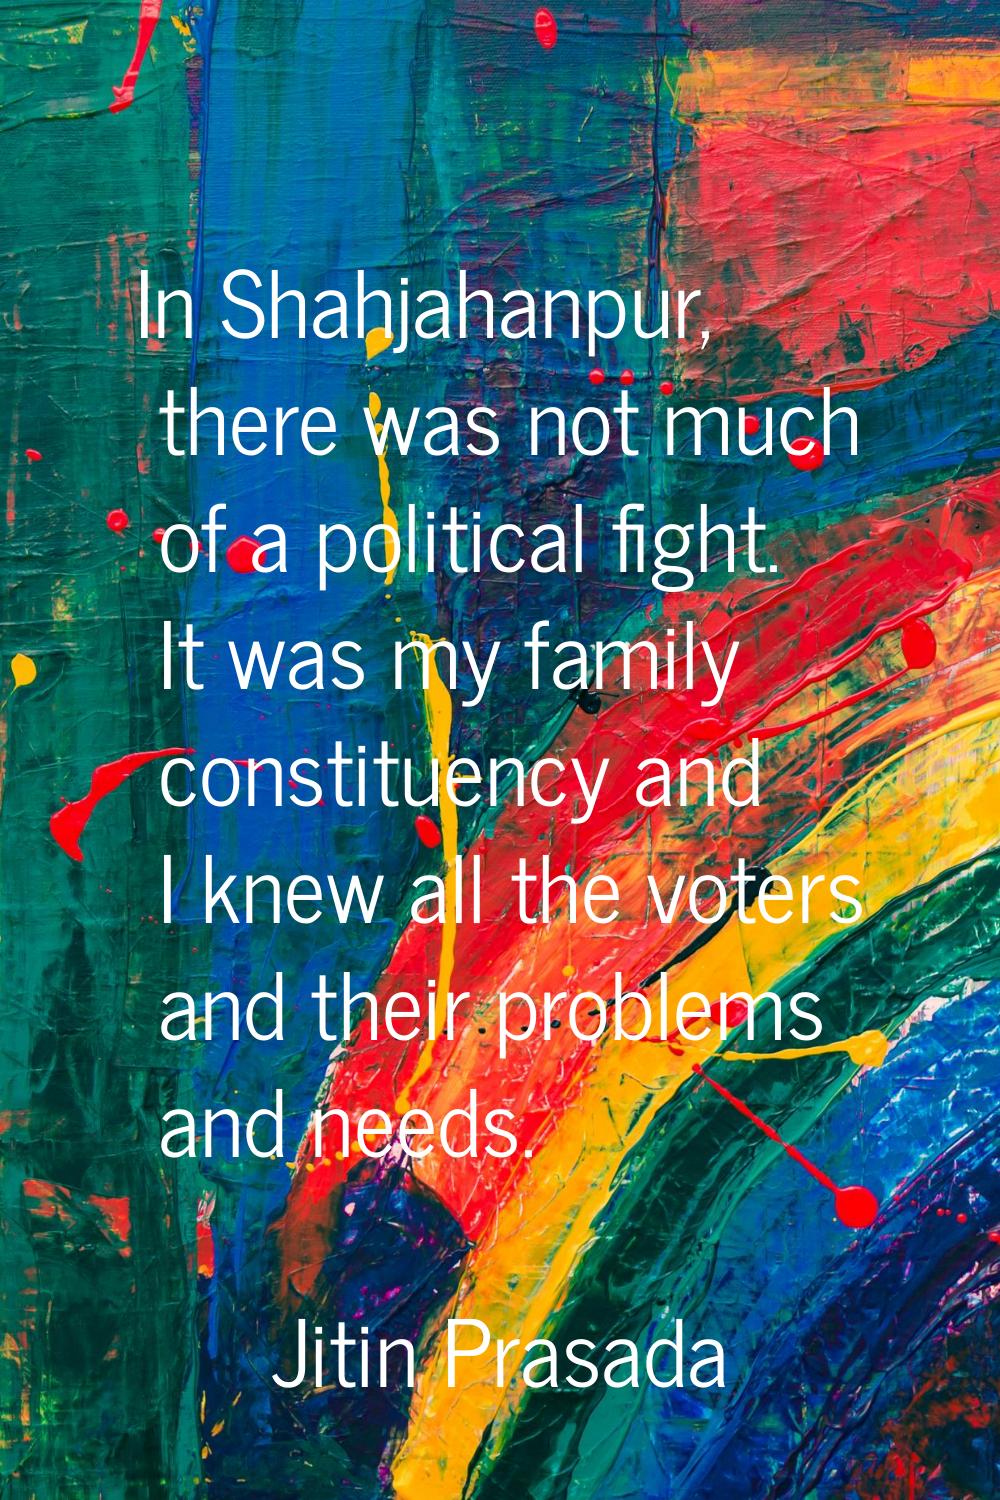 In Shahjahanpur, there was not much of a political fight. It was my family constituency and I knew 